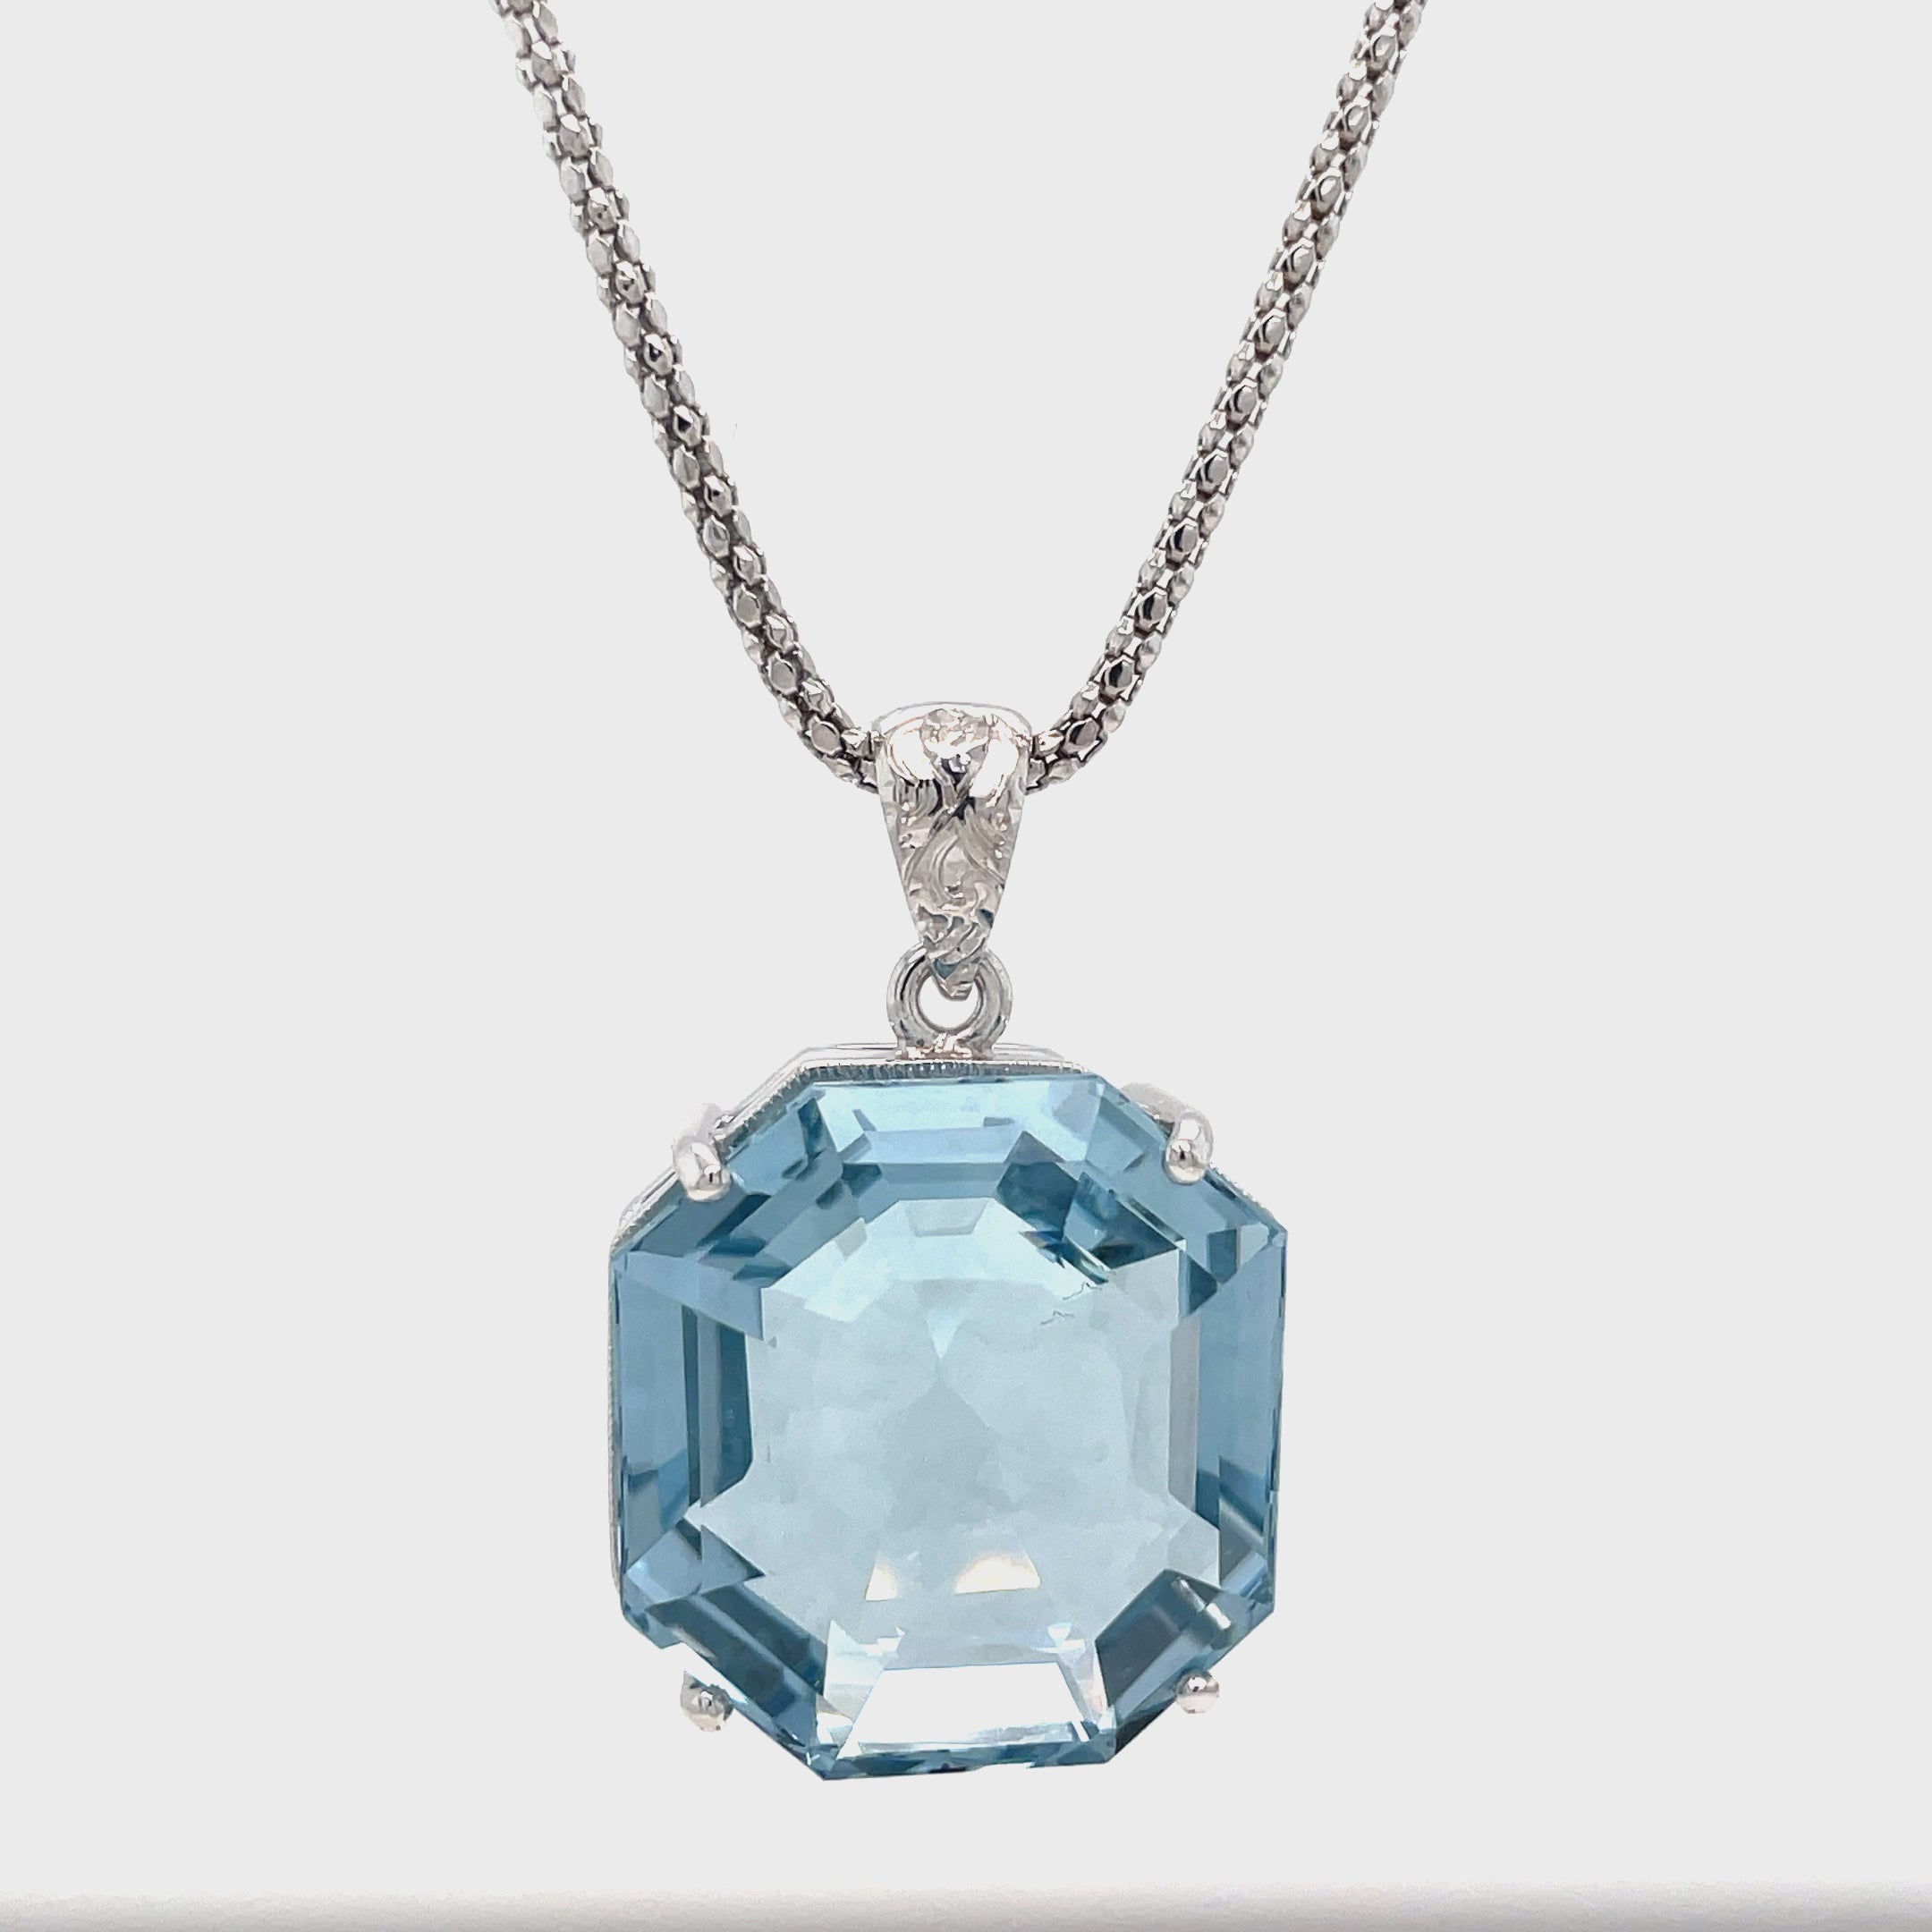 Expertly designed and crafted, our Aquamarine Necklace features a stunning octahedron aquamarine with a diamond cut bail. The custom-made white gold mounting adds a touch of elegance and is complemented by an Italian-made chain. Elevate any outfit with this eye-catching necklace. Chain is optional 20" long ($550)